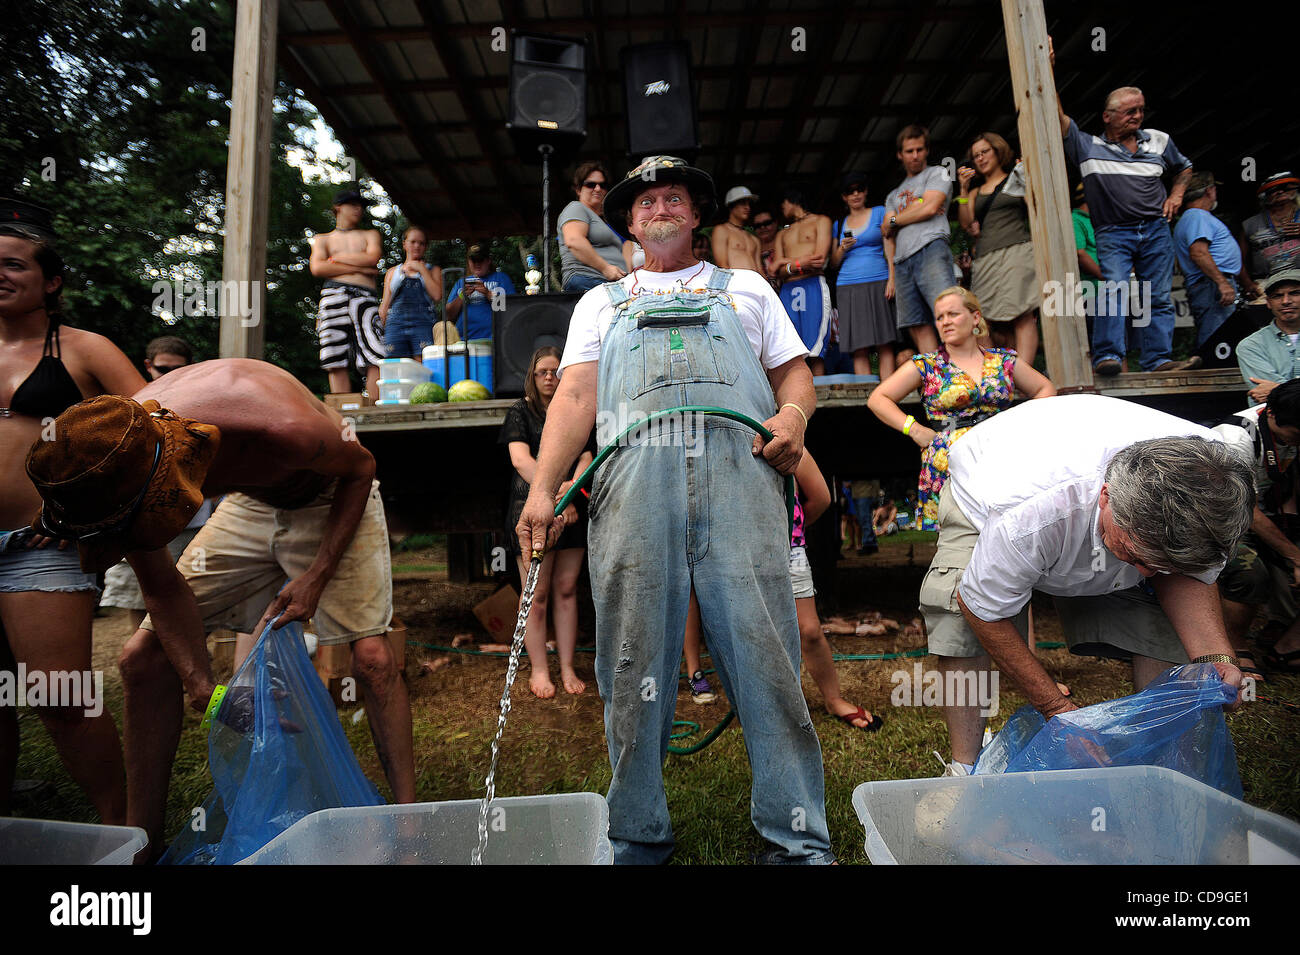 SATURDAY JULY 10, 2010 EAST DUBLIN, GEORGIA - A Redneck Games participant smiles goofily during the bobbing for pigs feet contest at Buckeye Park during the Redneck Games in East Dublin, Georgia. The games started in 1996 as spoof on the Olympics which were being held in Atlanta, Georgia at the time Stock Photo